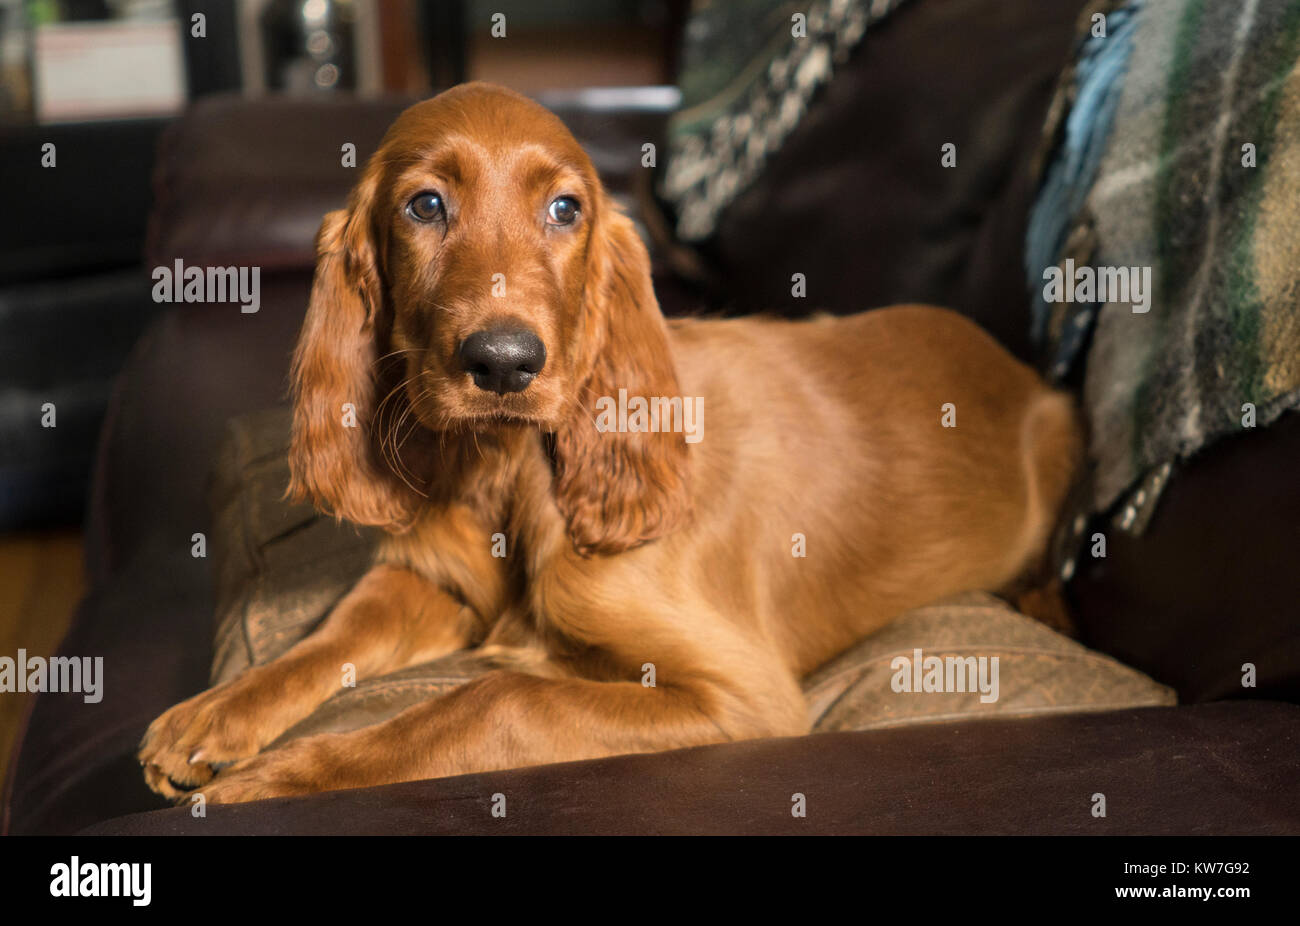 A young pure breed Irish Setter relaxes in a rare moment of quiet on the couch Stock Photo